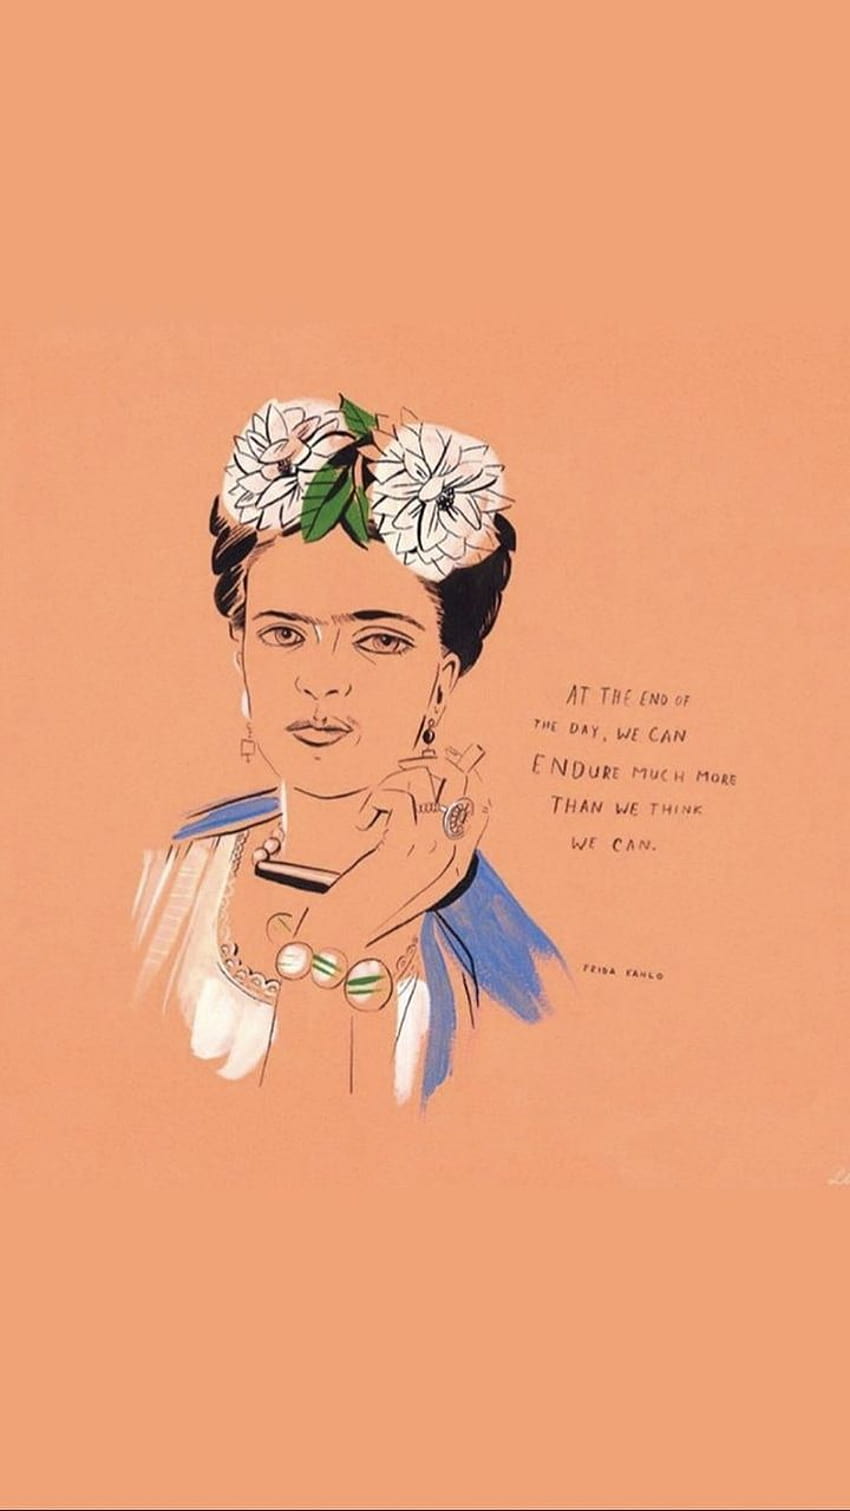 31 Frida KahloInspired Tattoos Thatll Make You Want To Get Inked   HuffPost Voices